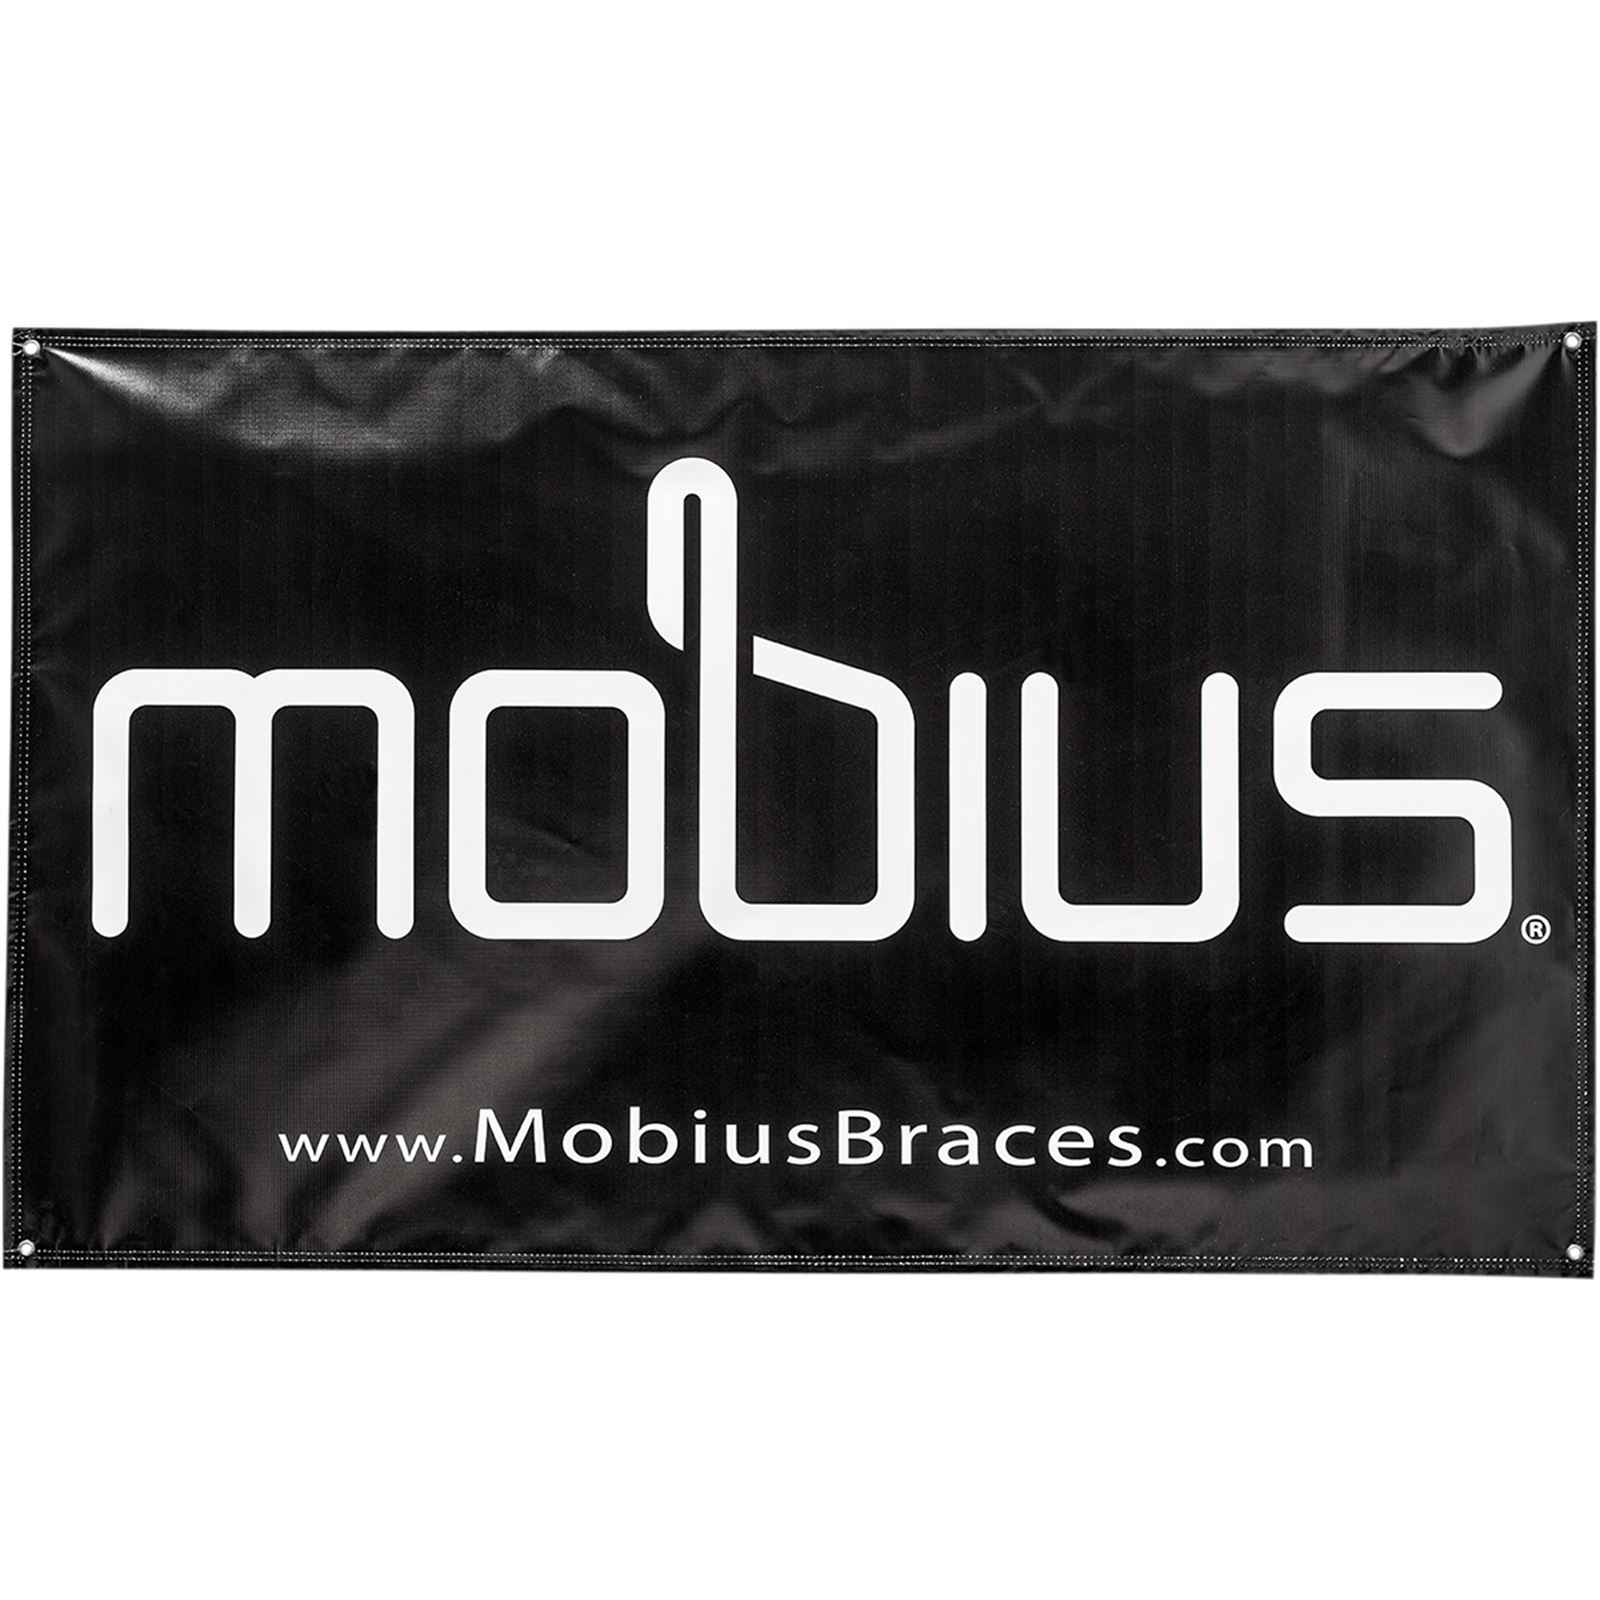 Mobius Banner - 36" x 60"